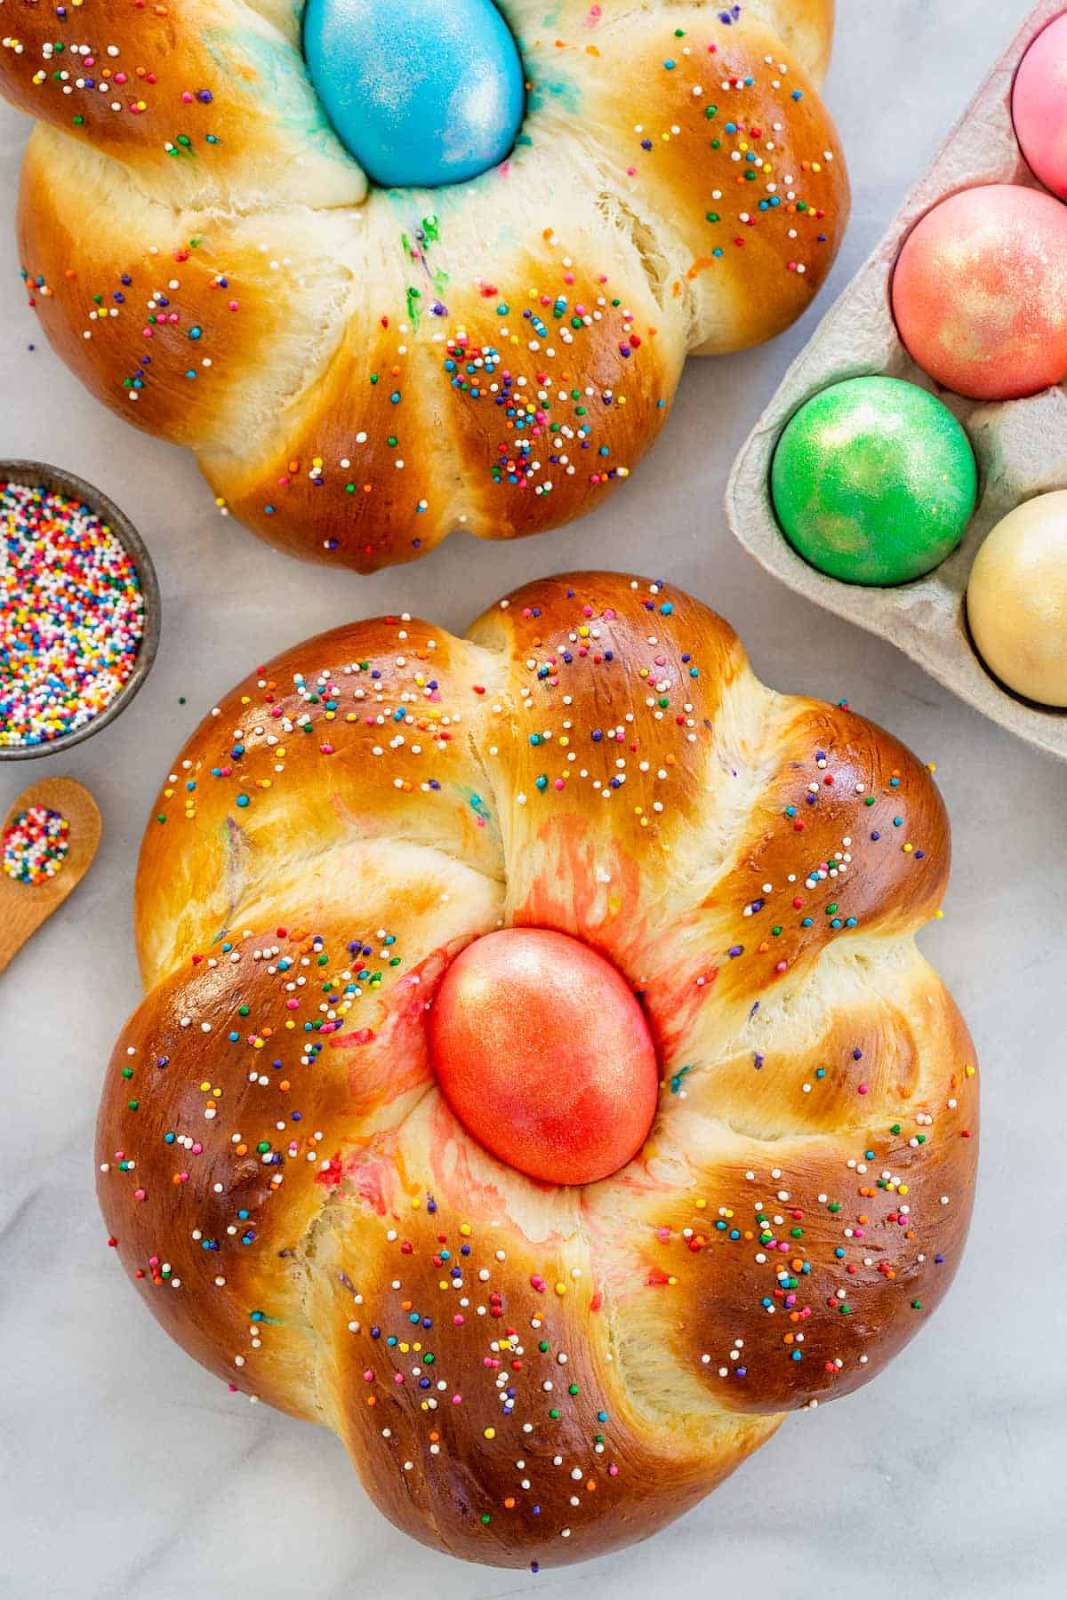 Two loaves of traditional Italian Easter bread covered in rainbow sprinkles and topped with a colored Easter egg in the center for decoration.